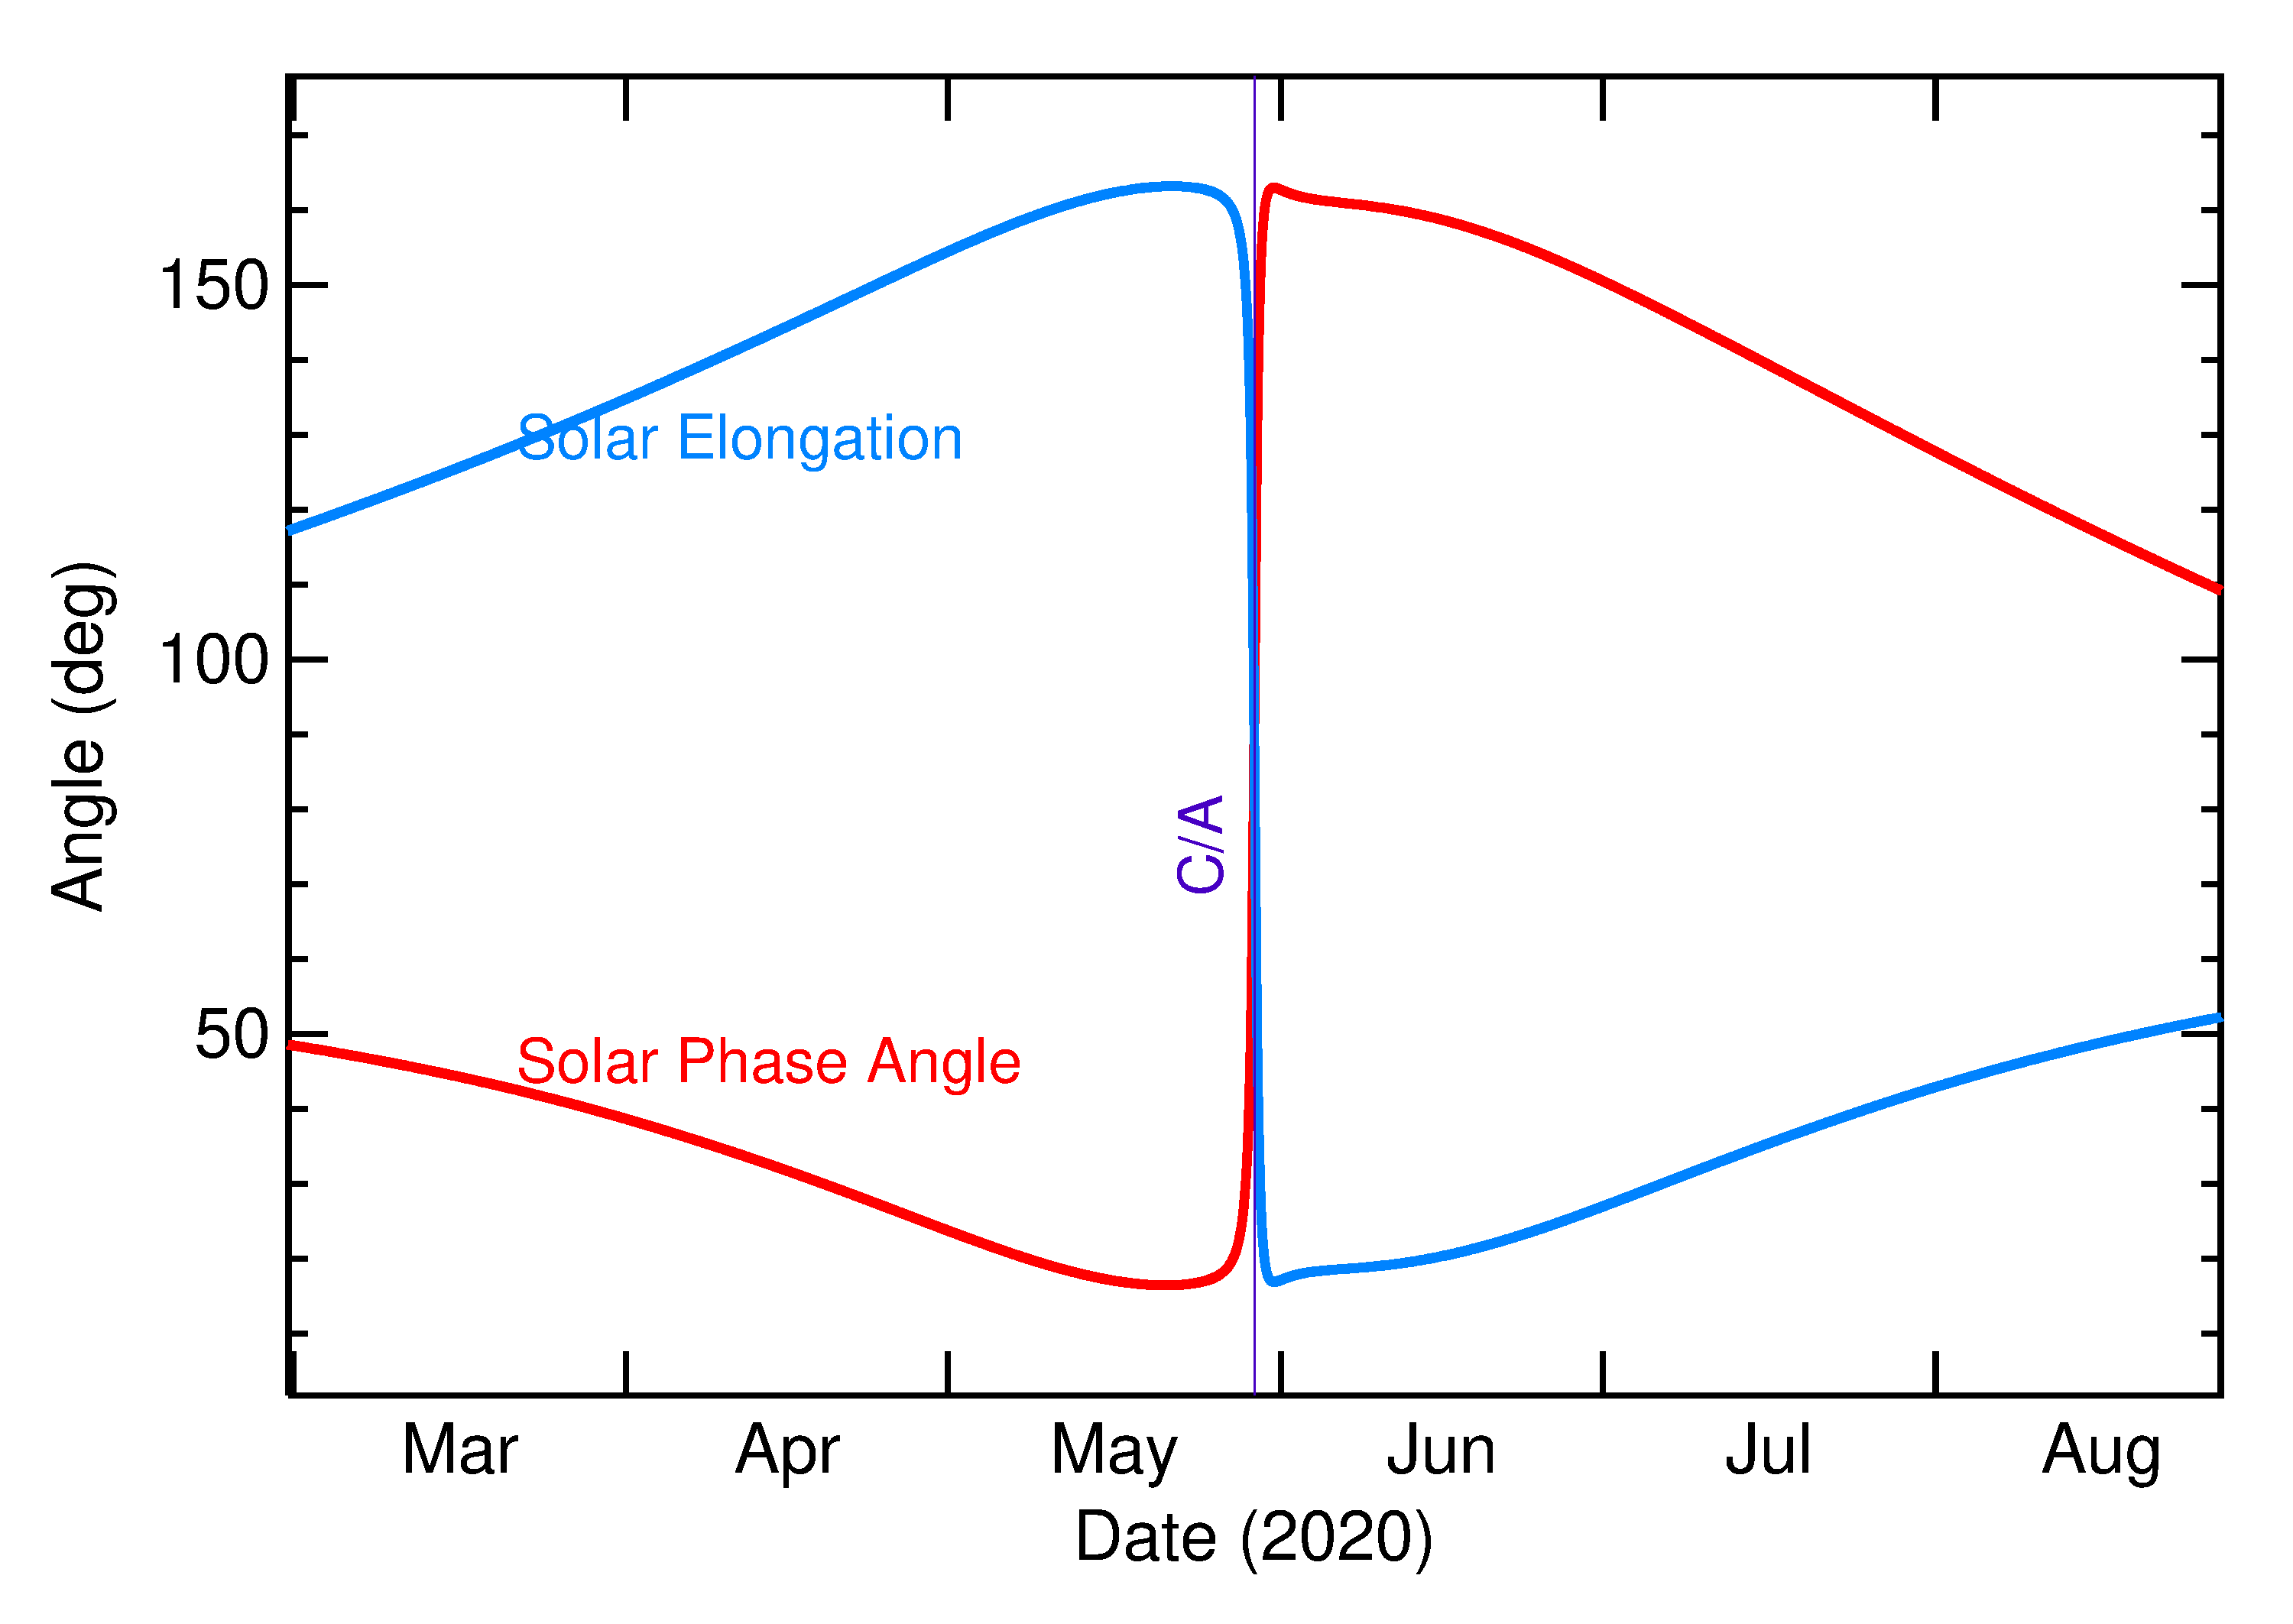 Solar Elongation and Solar Phase Angle of 2020 KJ4 in the months around closest approach